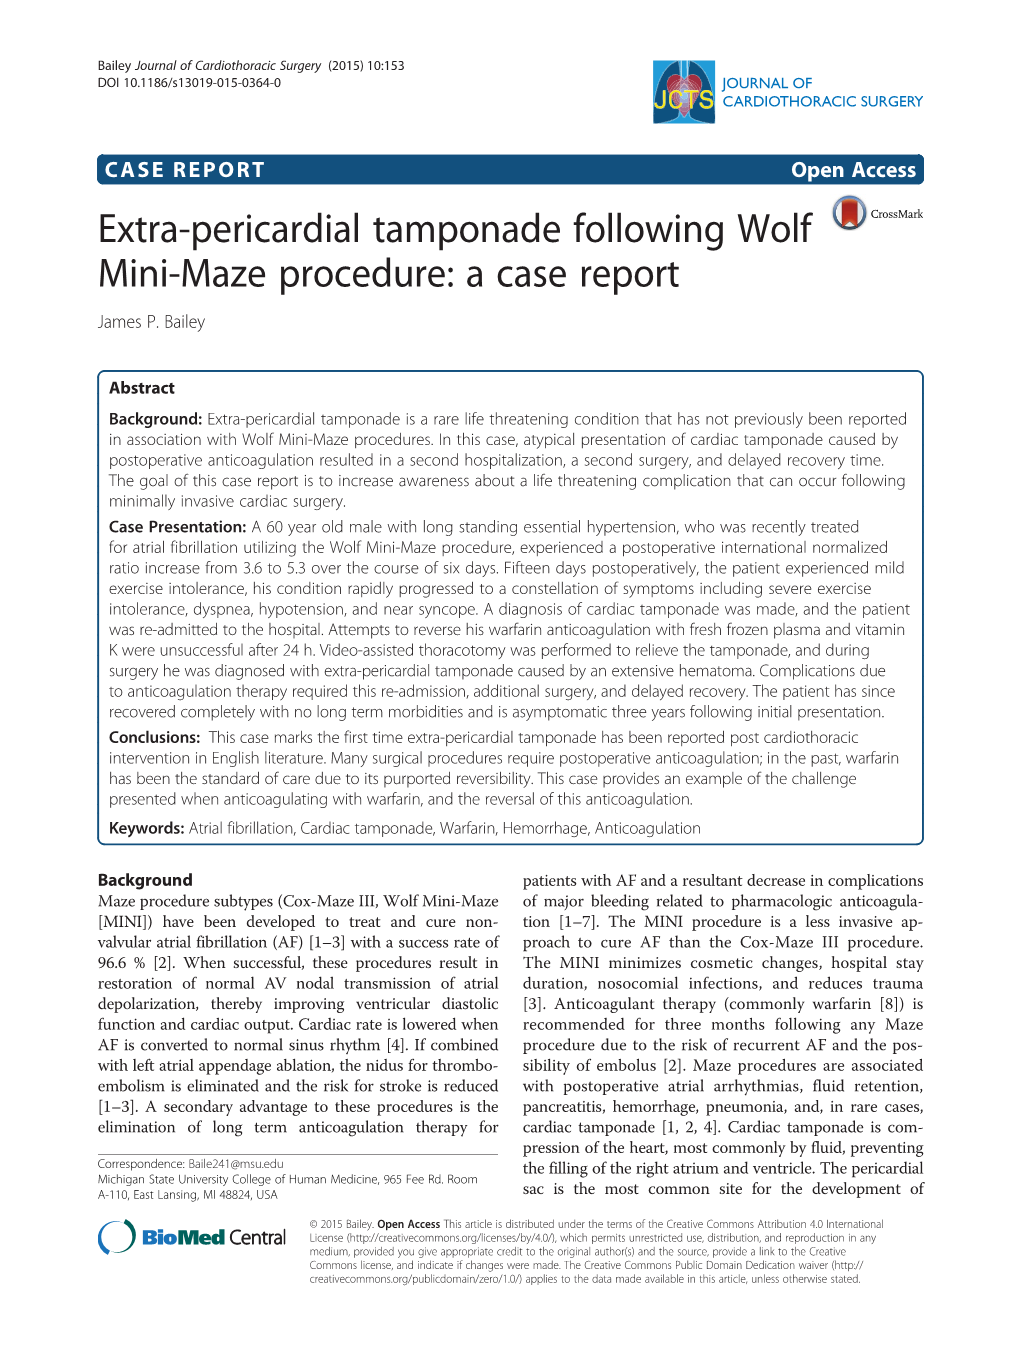 Extra-Pericardial Tamponade Following Wolf Mini-Maze Procedure: a Case Report James P